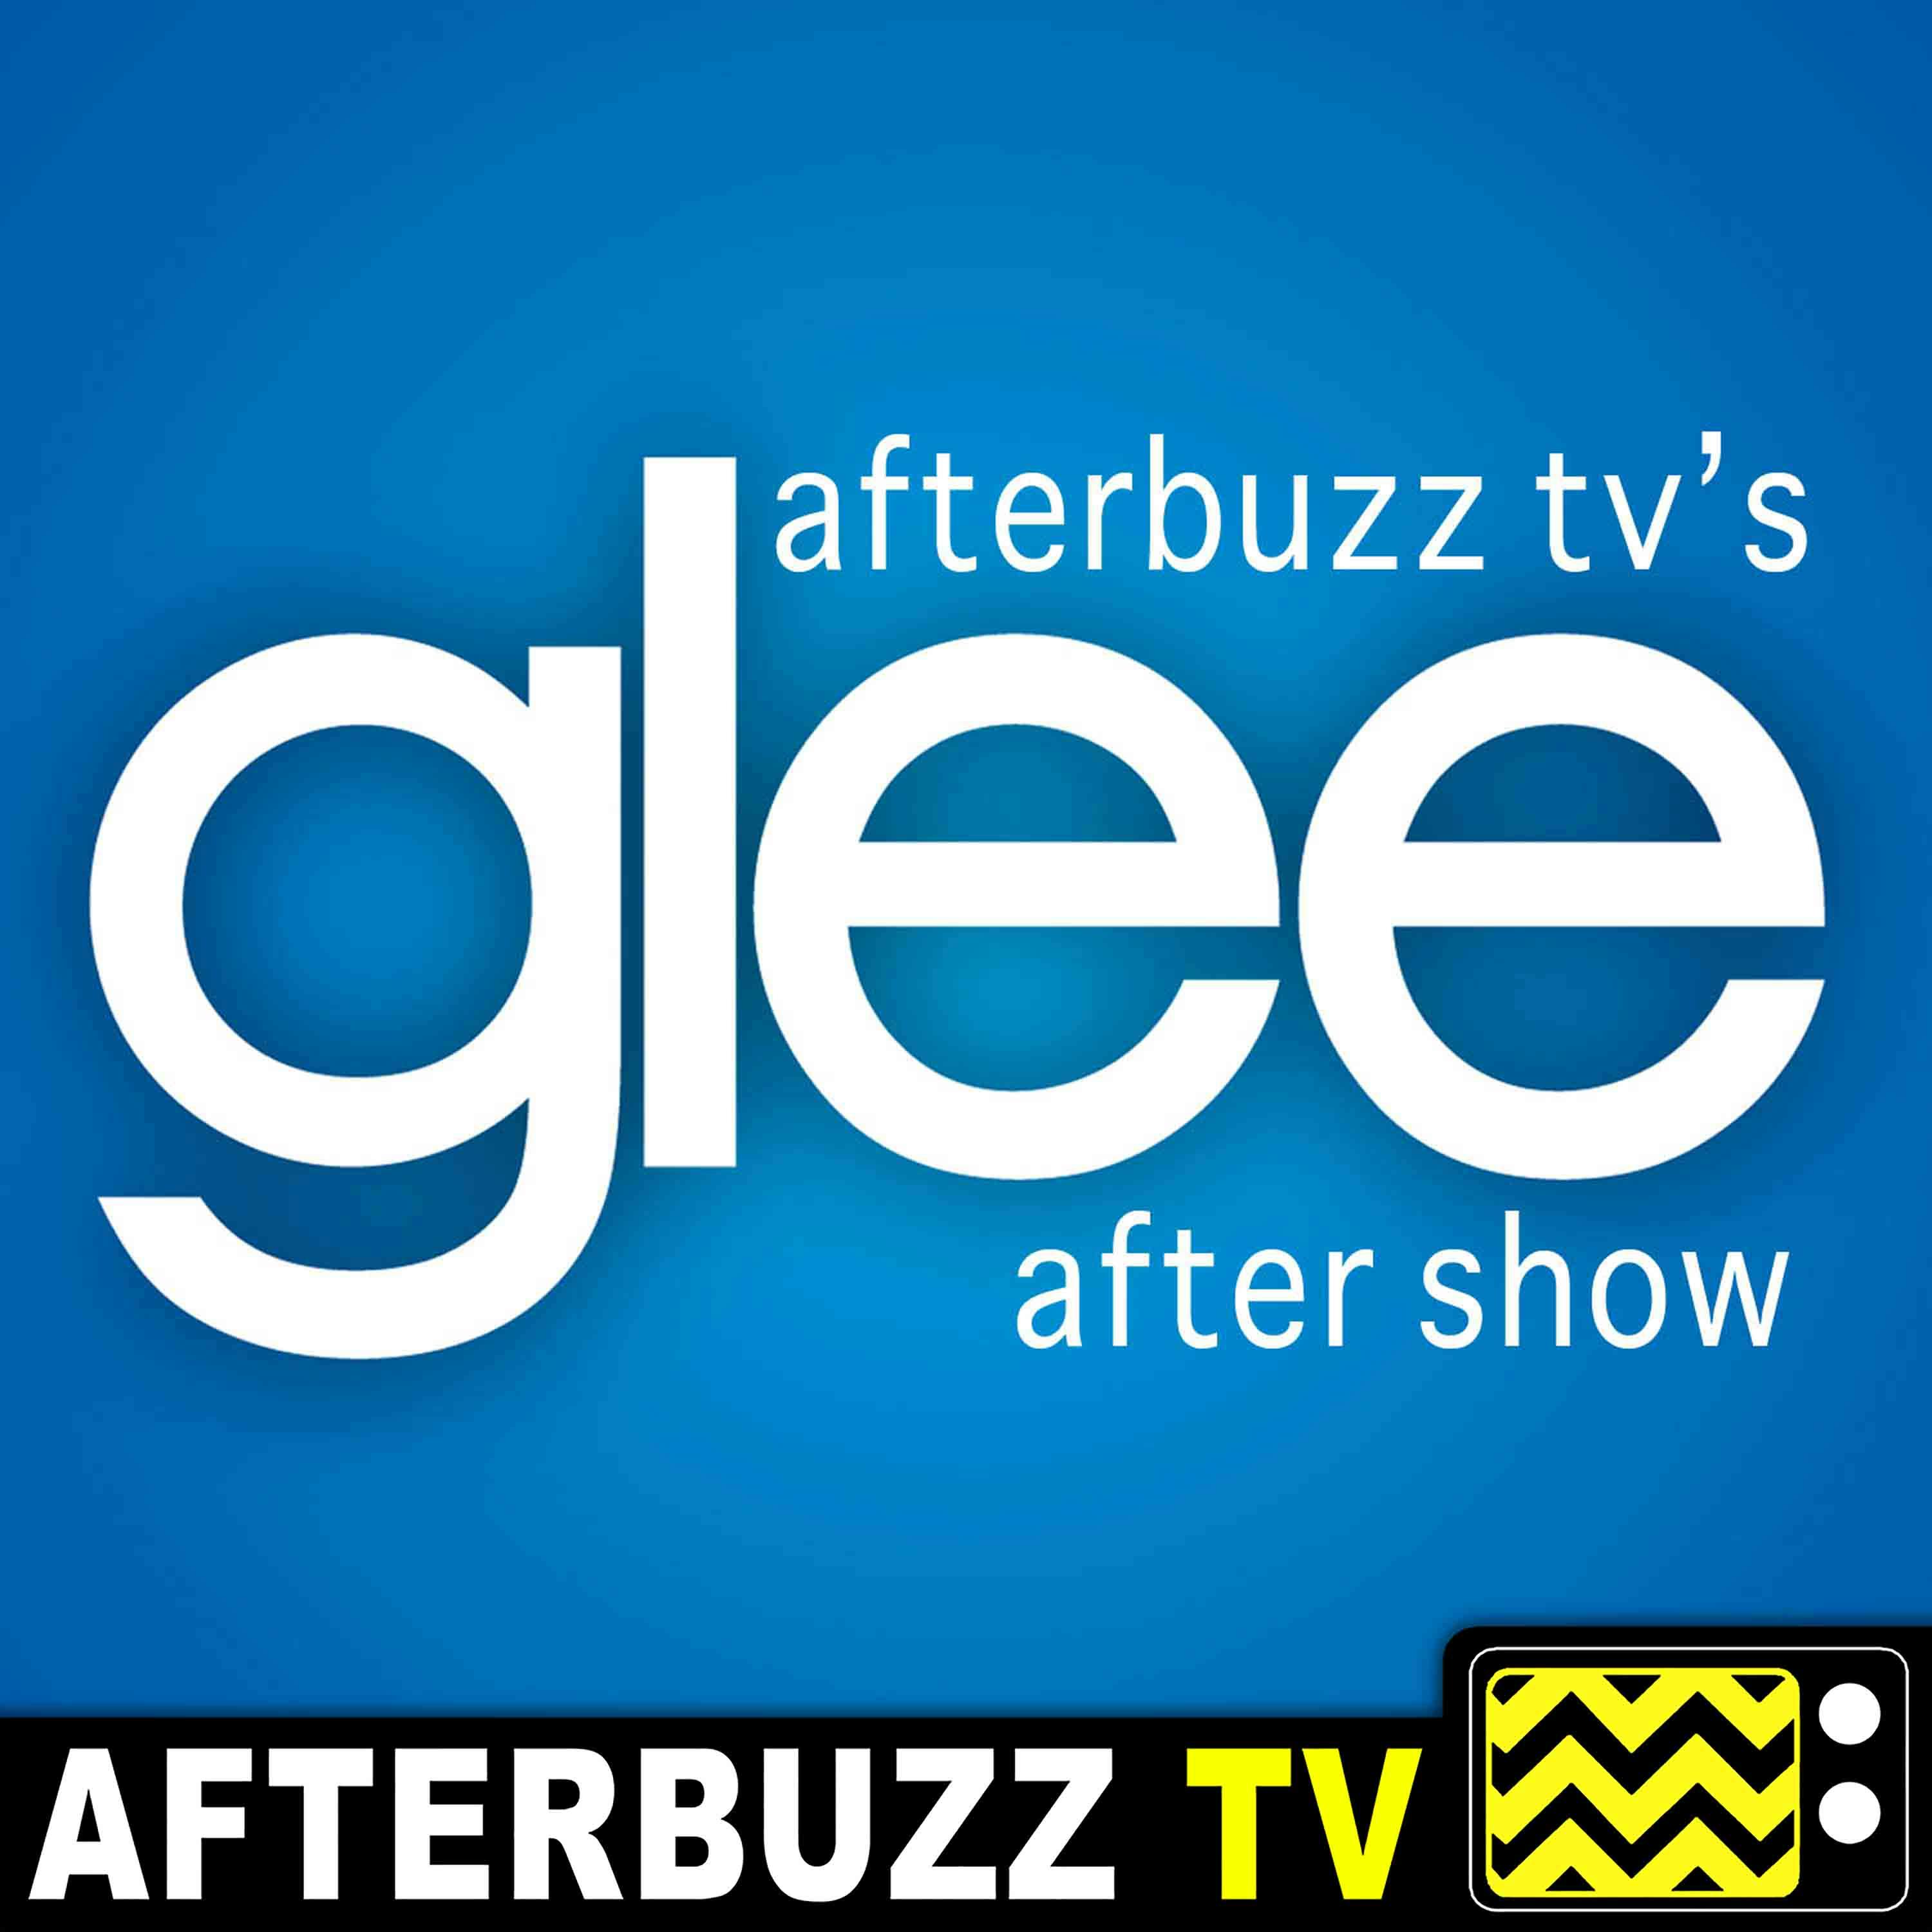 Glee S:5 | New New York E:14 | AfterBuzz TV AfterShow